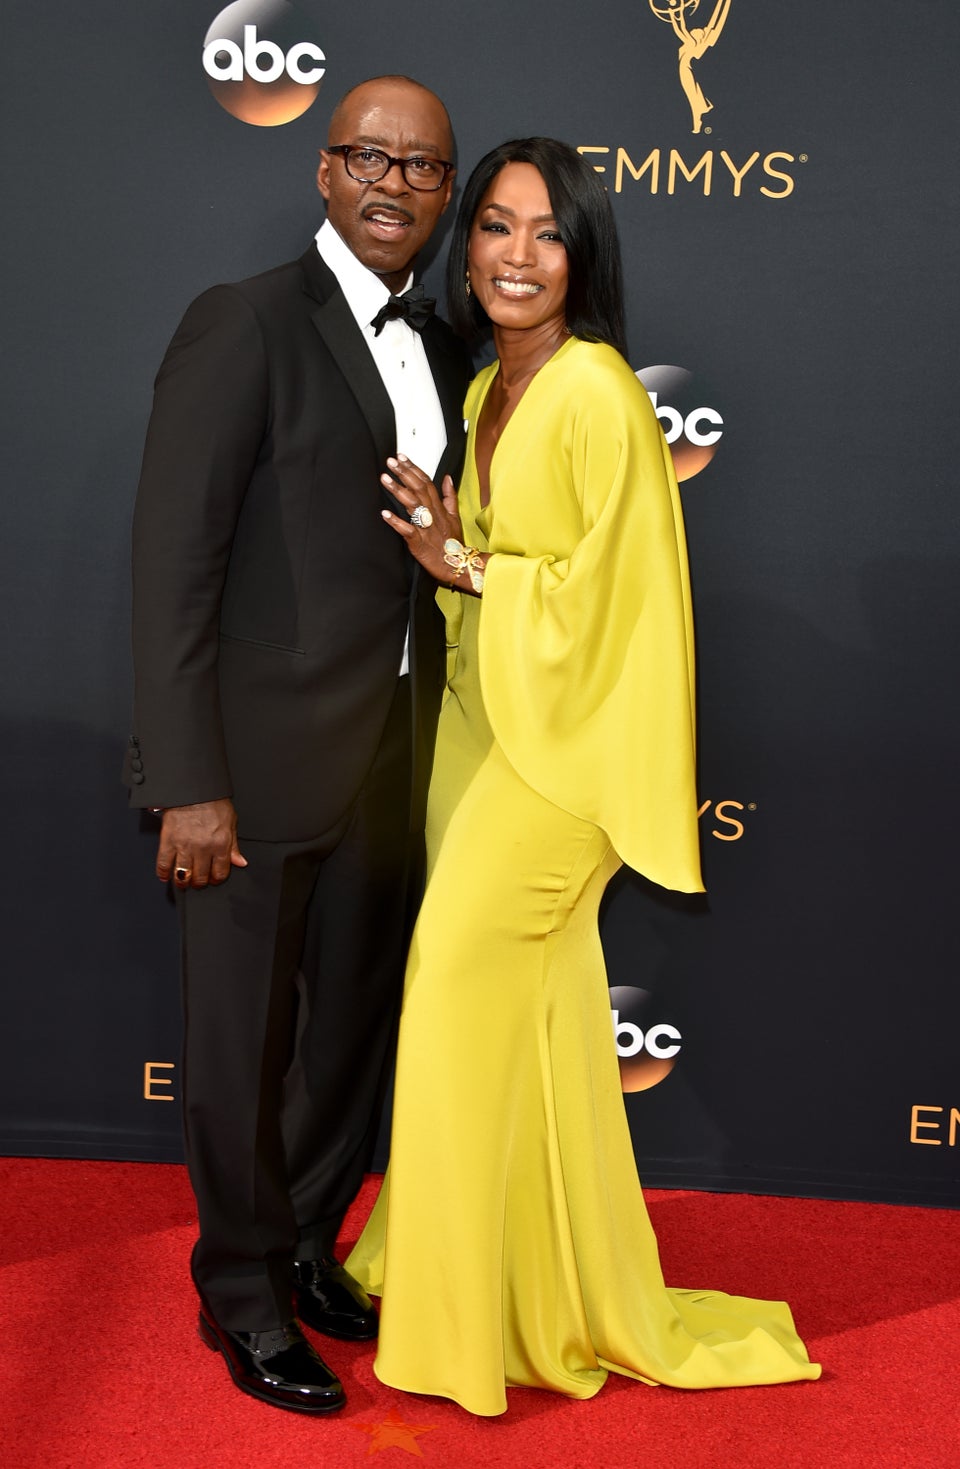 Courtney B. Vance Just Gave Wife Angela Bassett the Best Shout Out Ever